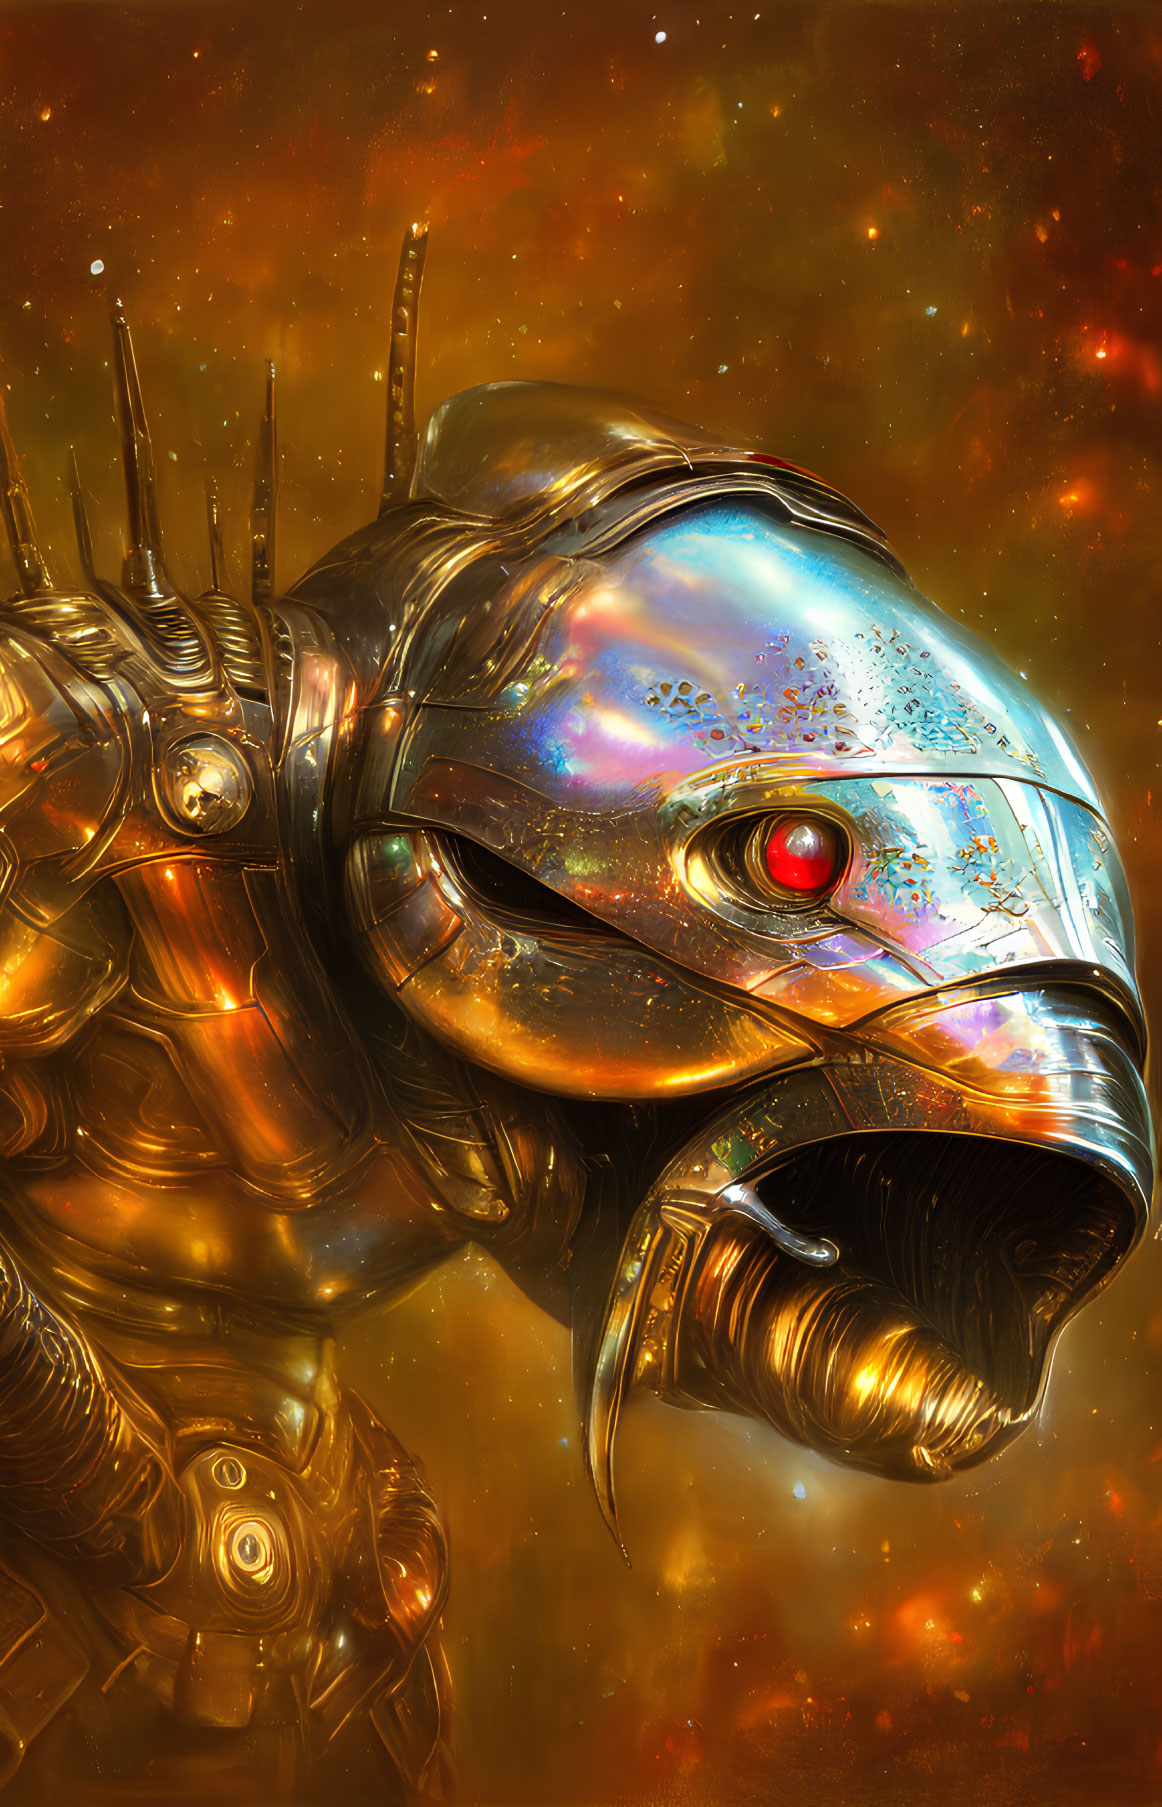 Detailed image of mechanized creature in golden armor with red eye on cosmic backdrop